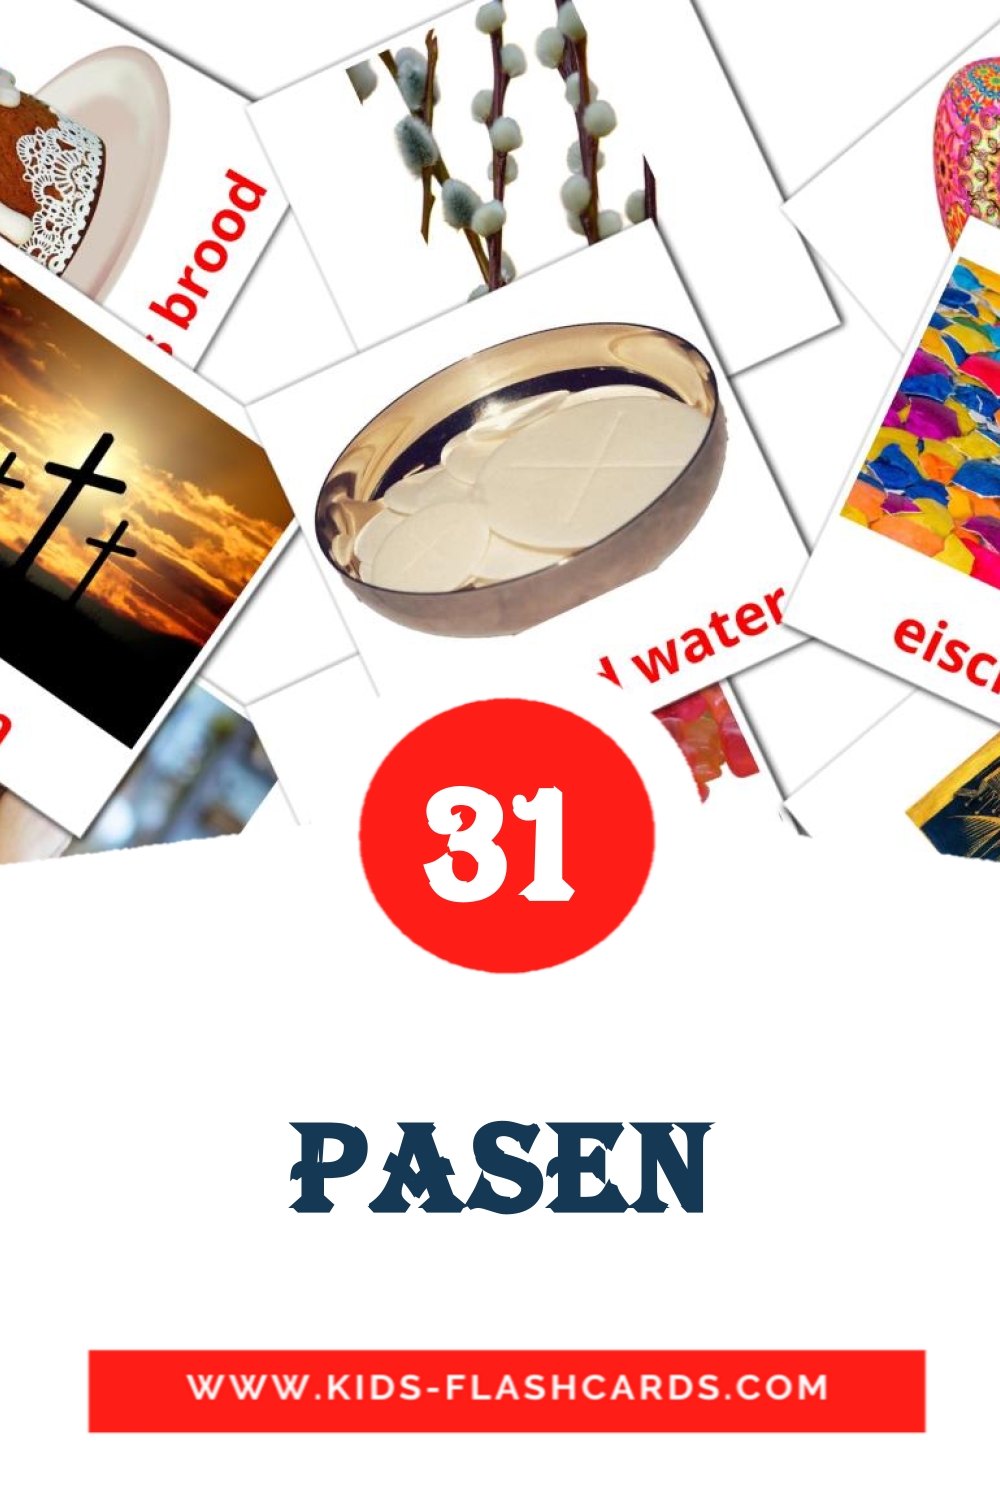 31 Pasen Picture Cards for Kindergarden in dutch